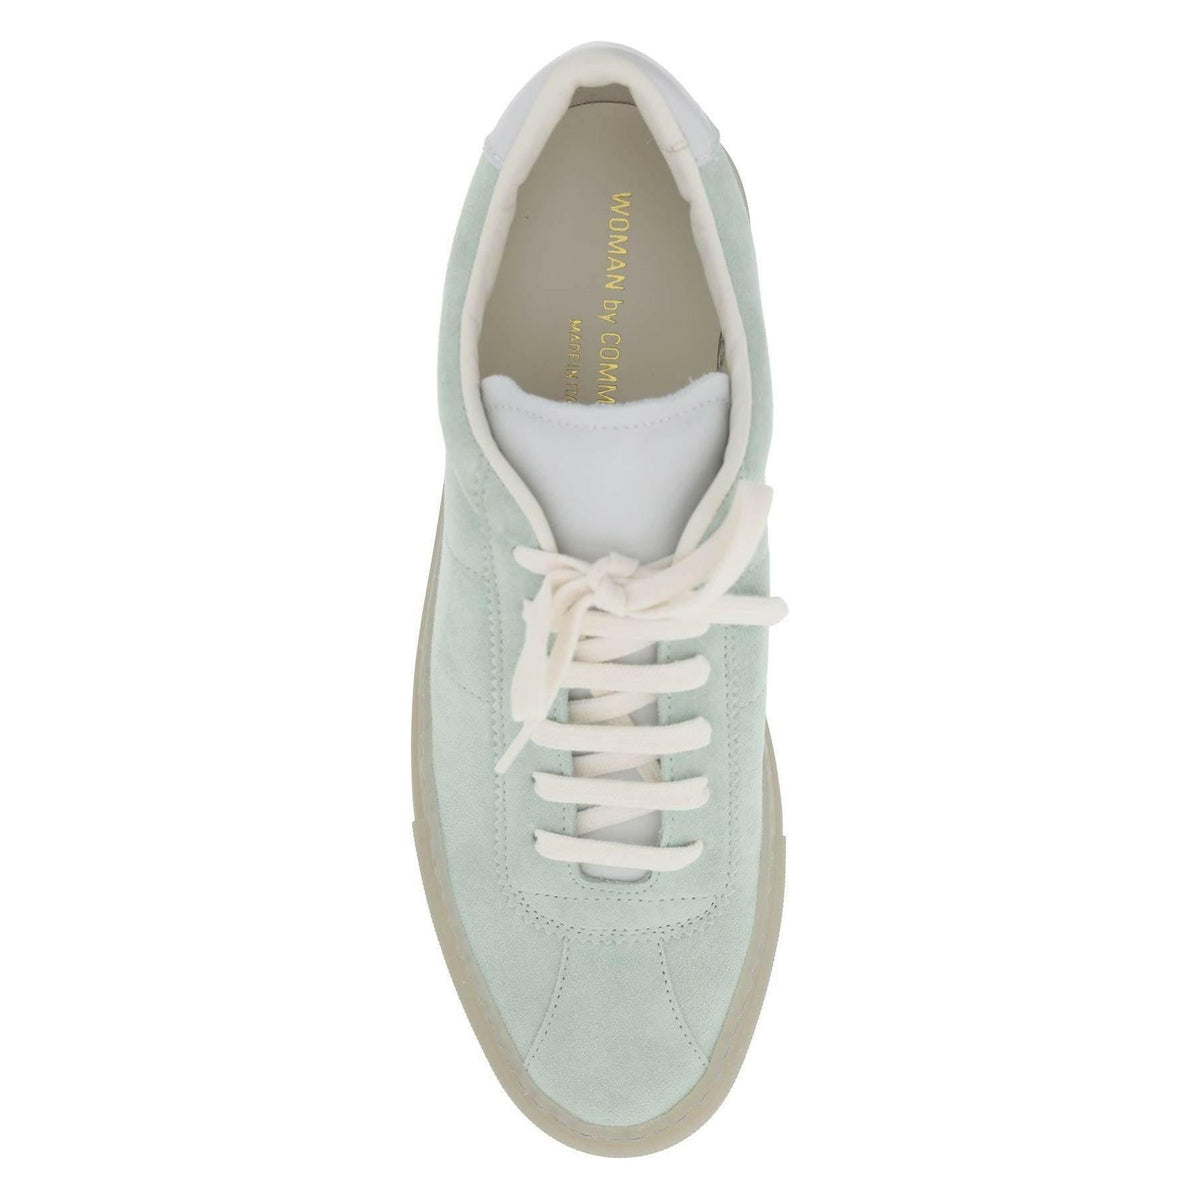 Mint Green Suede Leather Sneakers COMMON PROJECTS JOHN JULIA.